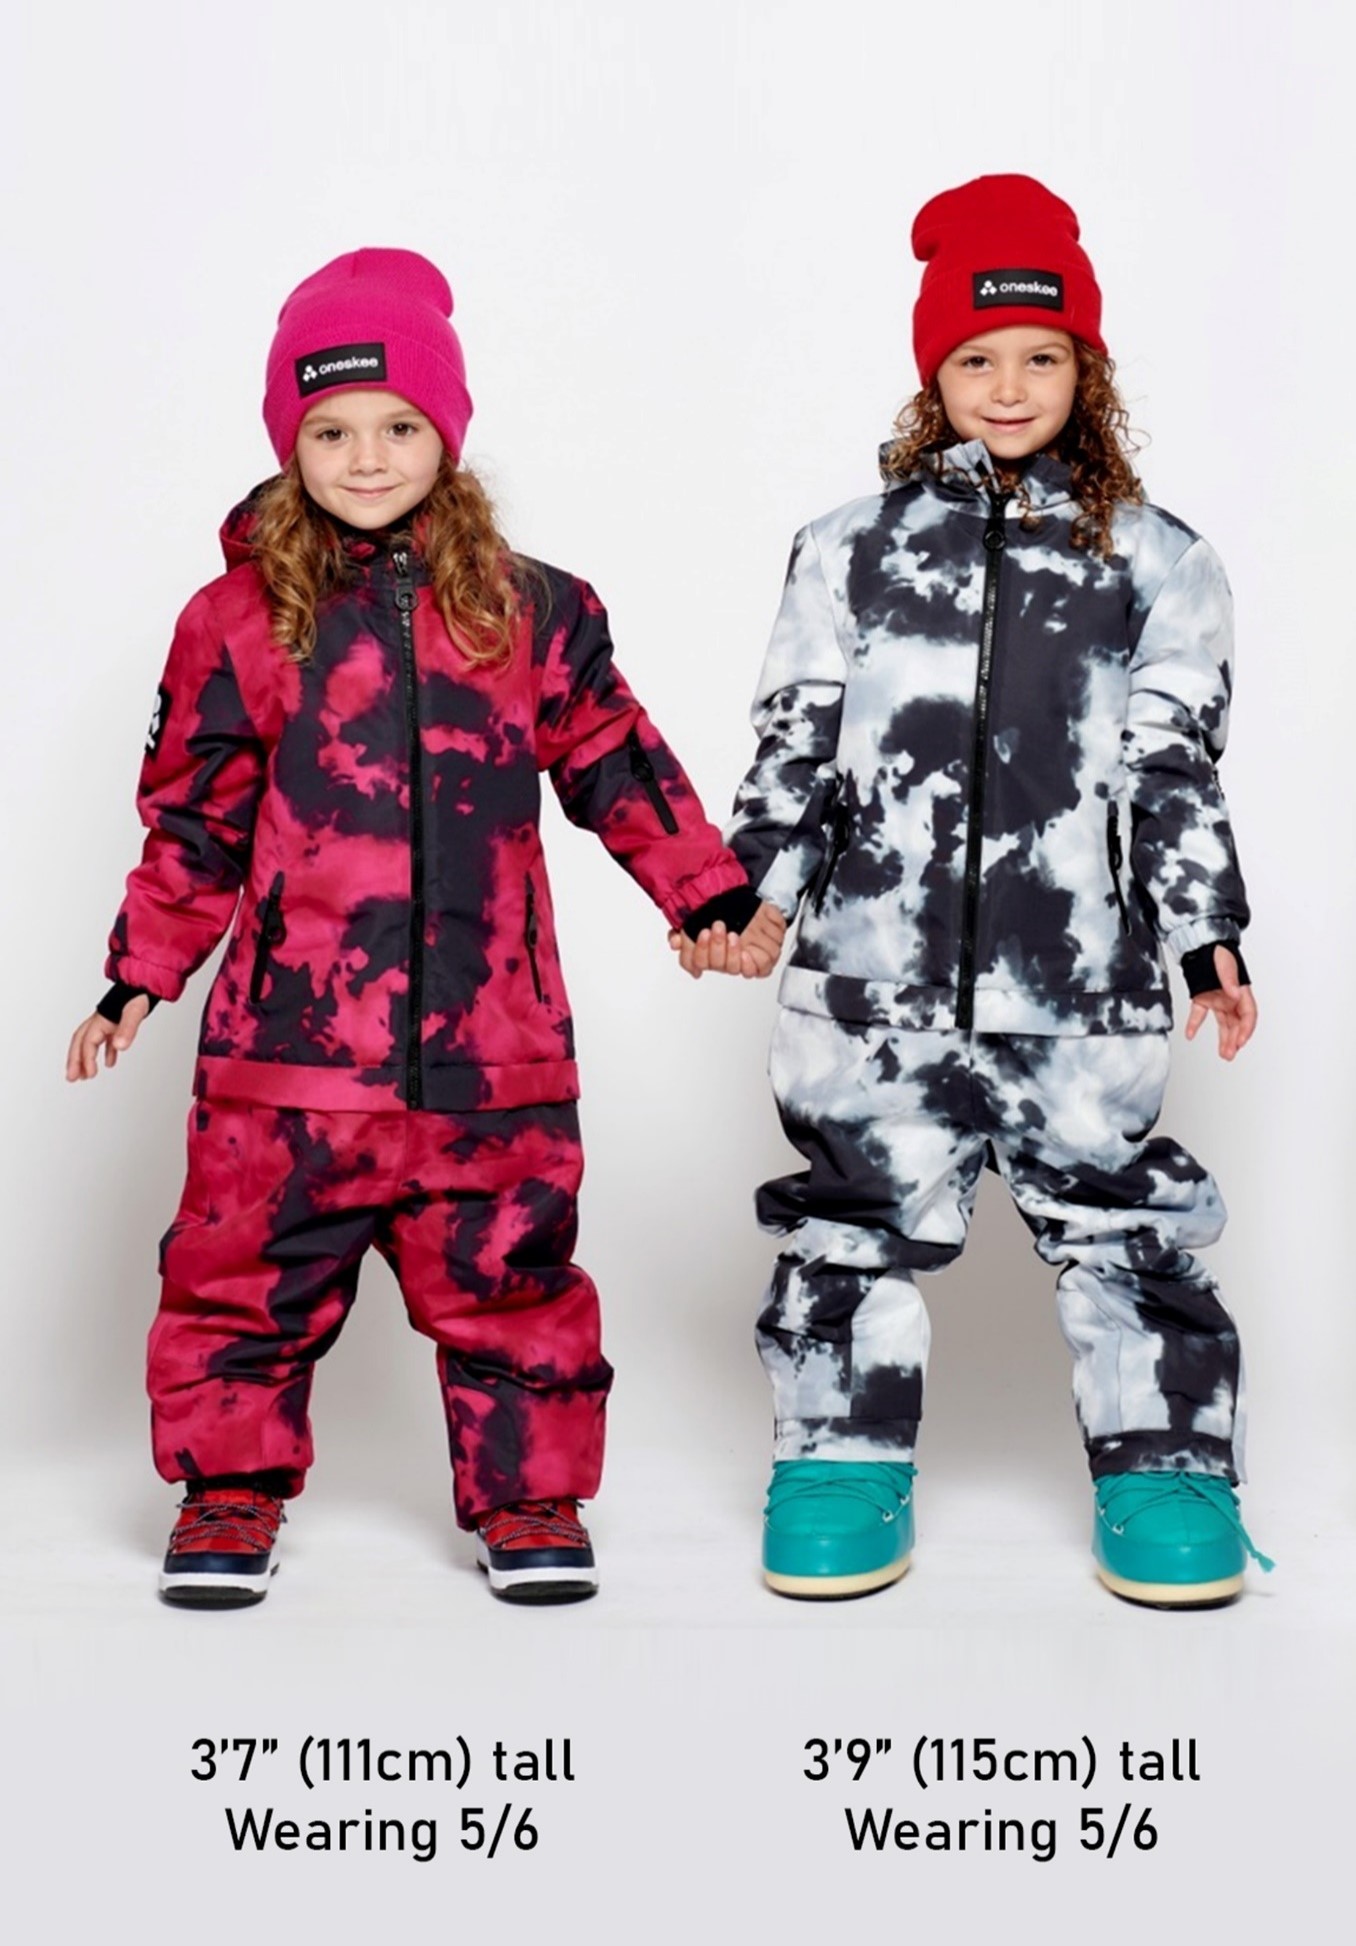 Two children modelling Ski Suits, the model on the left is 3'7" (111cm) tall Wearing 5/6. The model on the right is 3'9" (115cm) tall Wearing 5/6